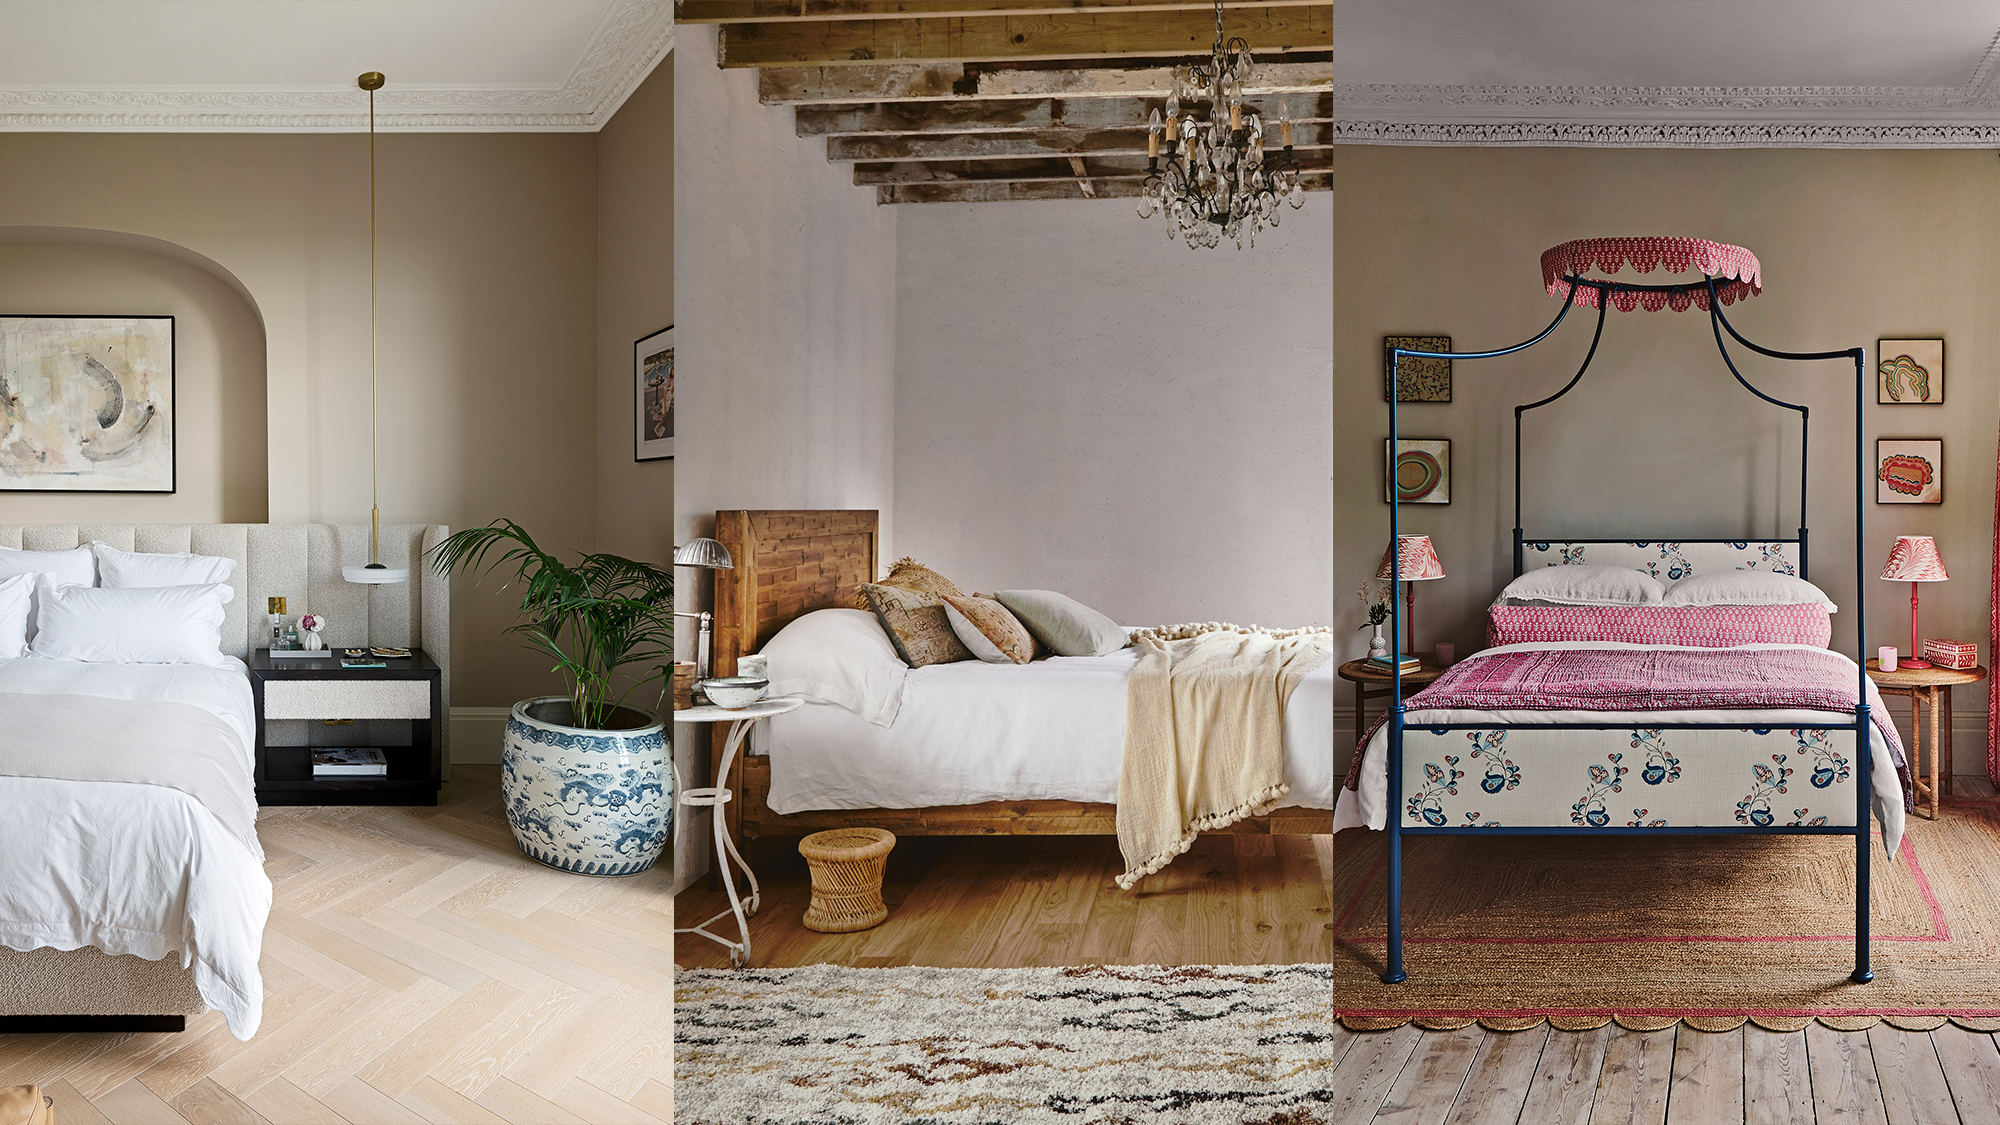 wood floor ideas for a bedroom: 10 ways to add character |